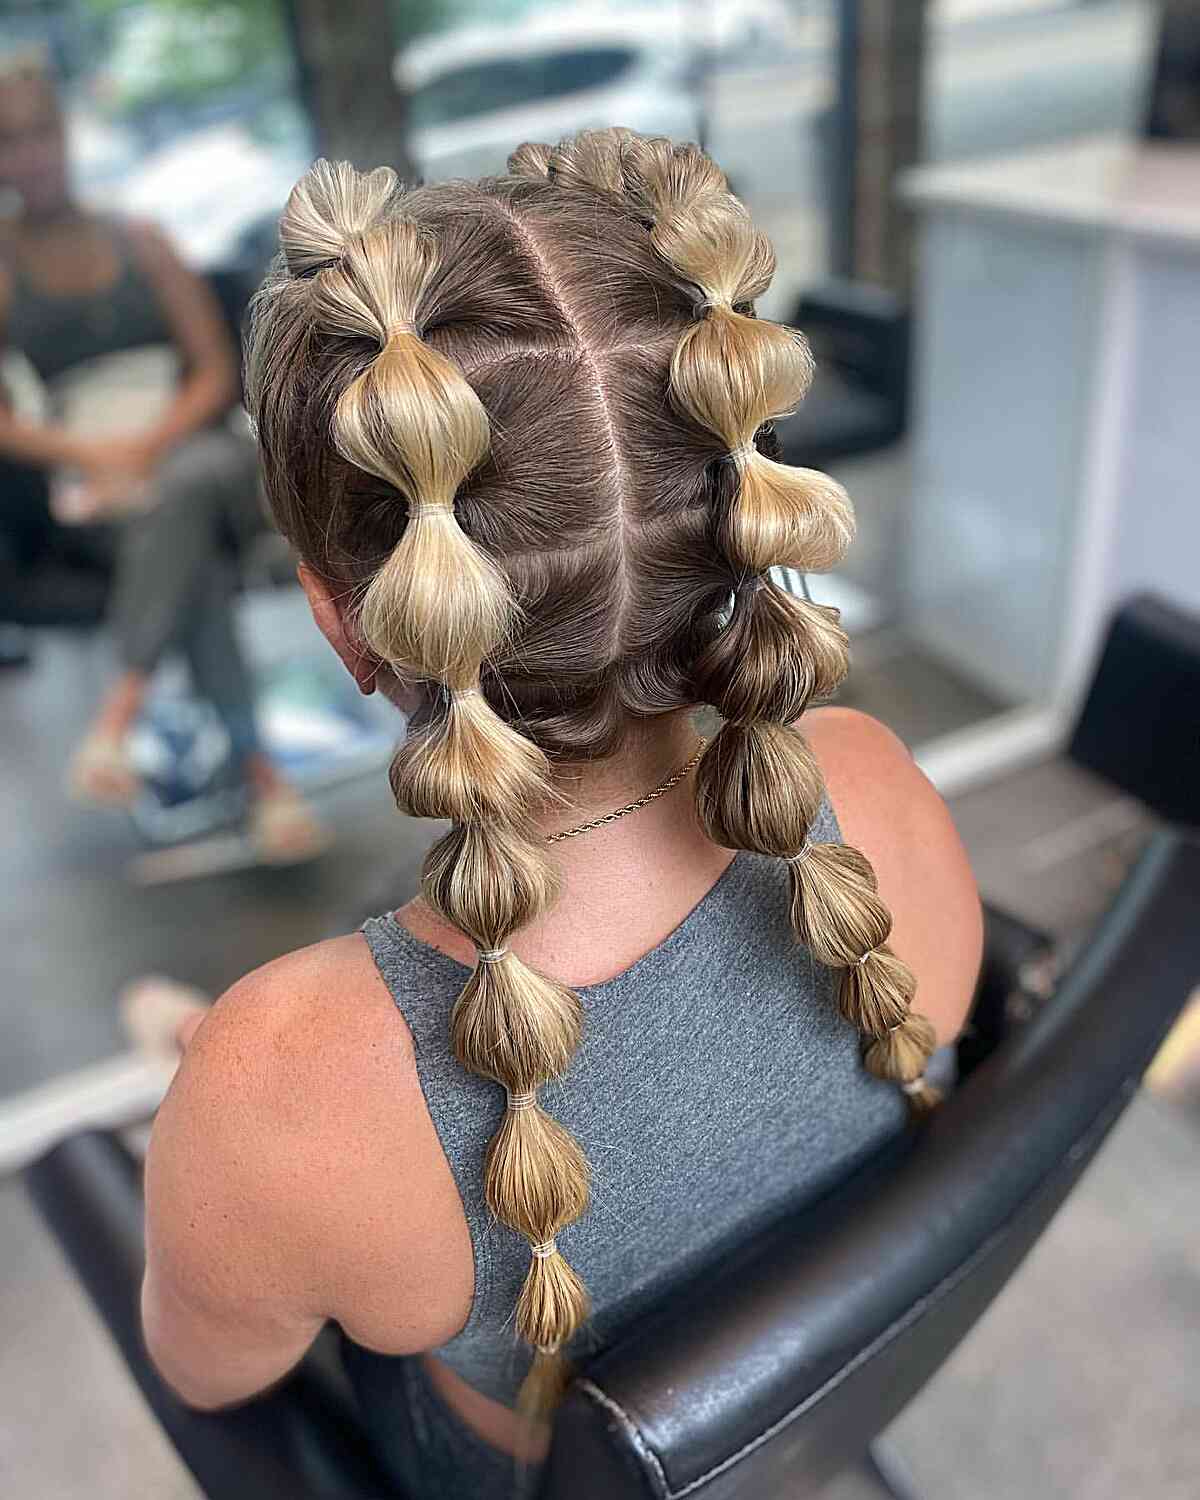 ide styling duo DOUBLE BRAID! pictorial included ✨ | Gallery posted by  yessicanggriani | Lemon8